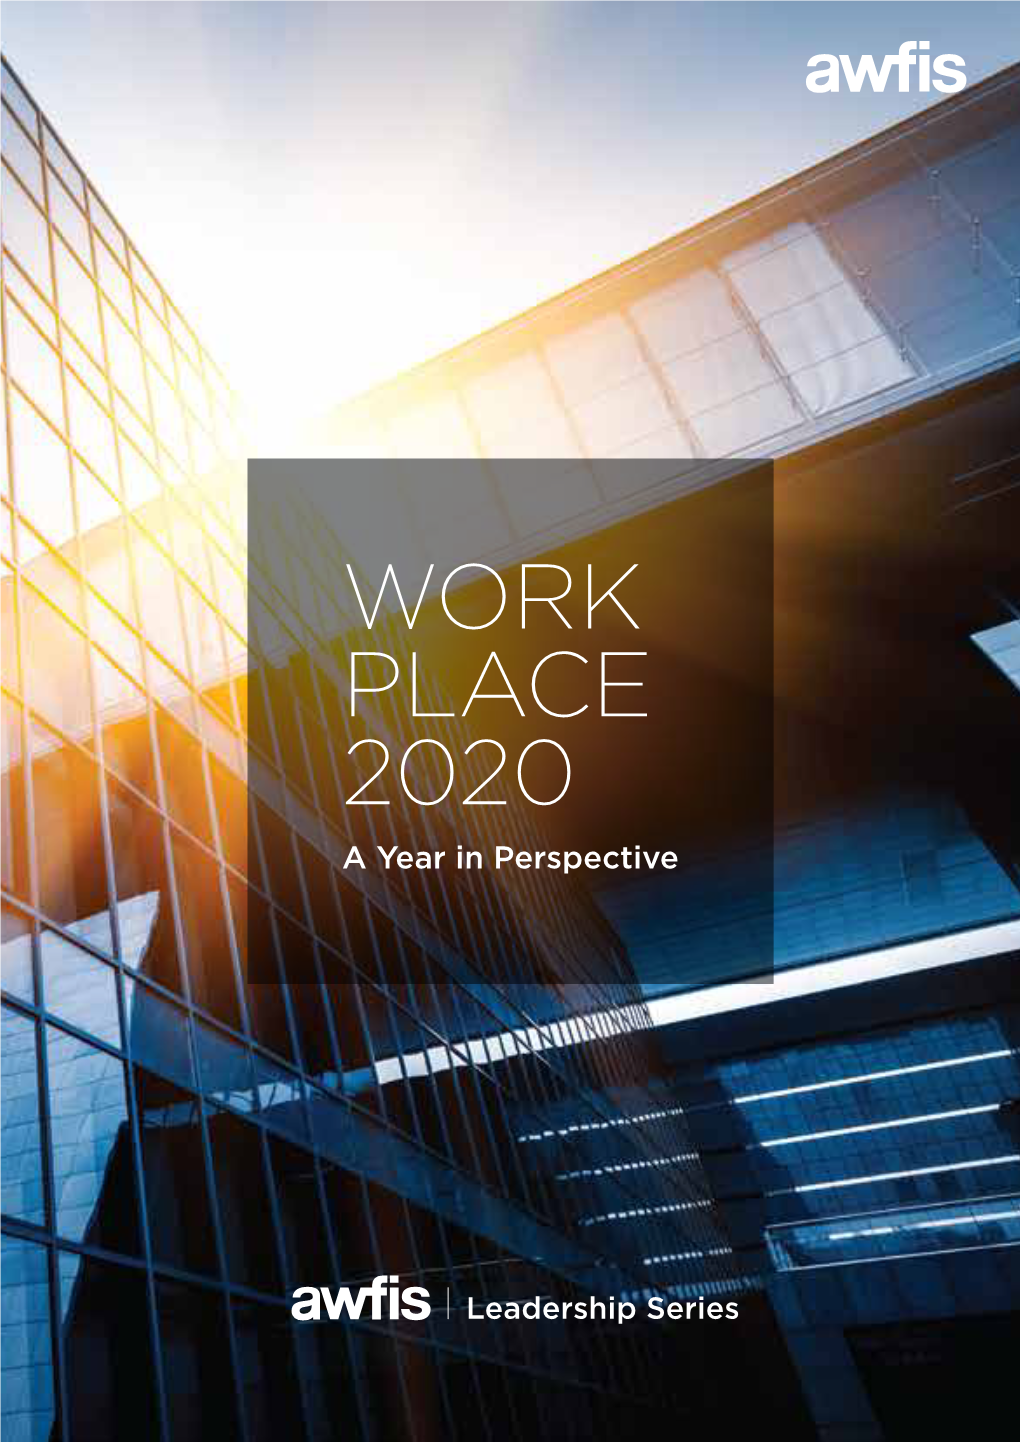 WORK PLACE 2020 a Year in Perspective